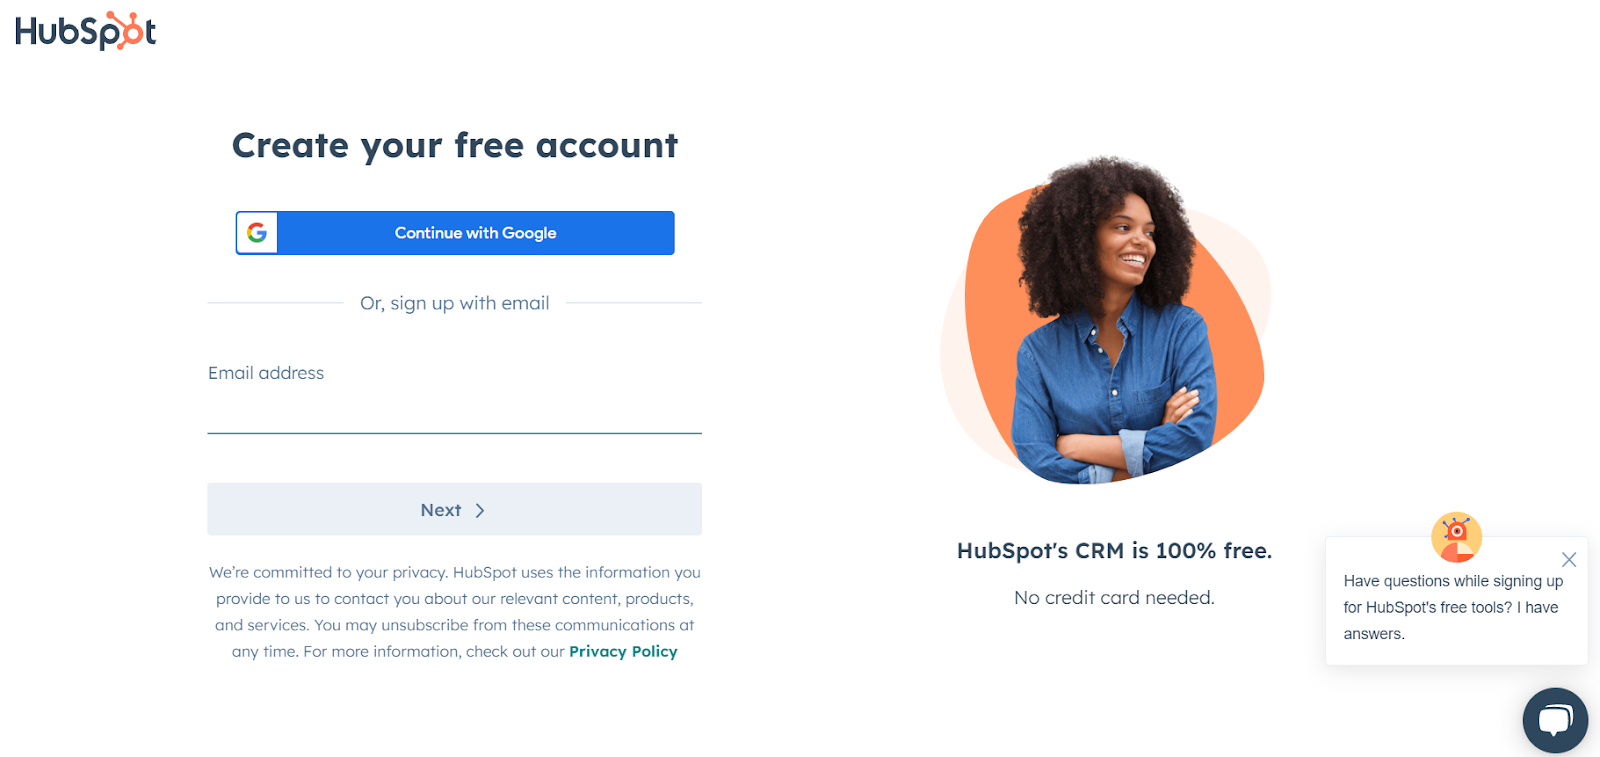 Step 1 - go to hubspot. Com and use your email to create free account.